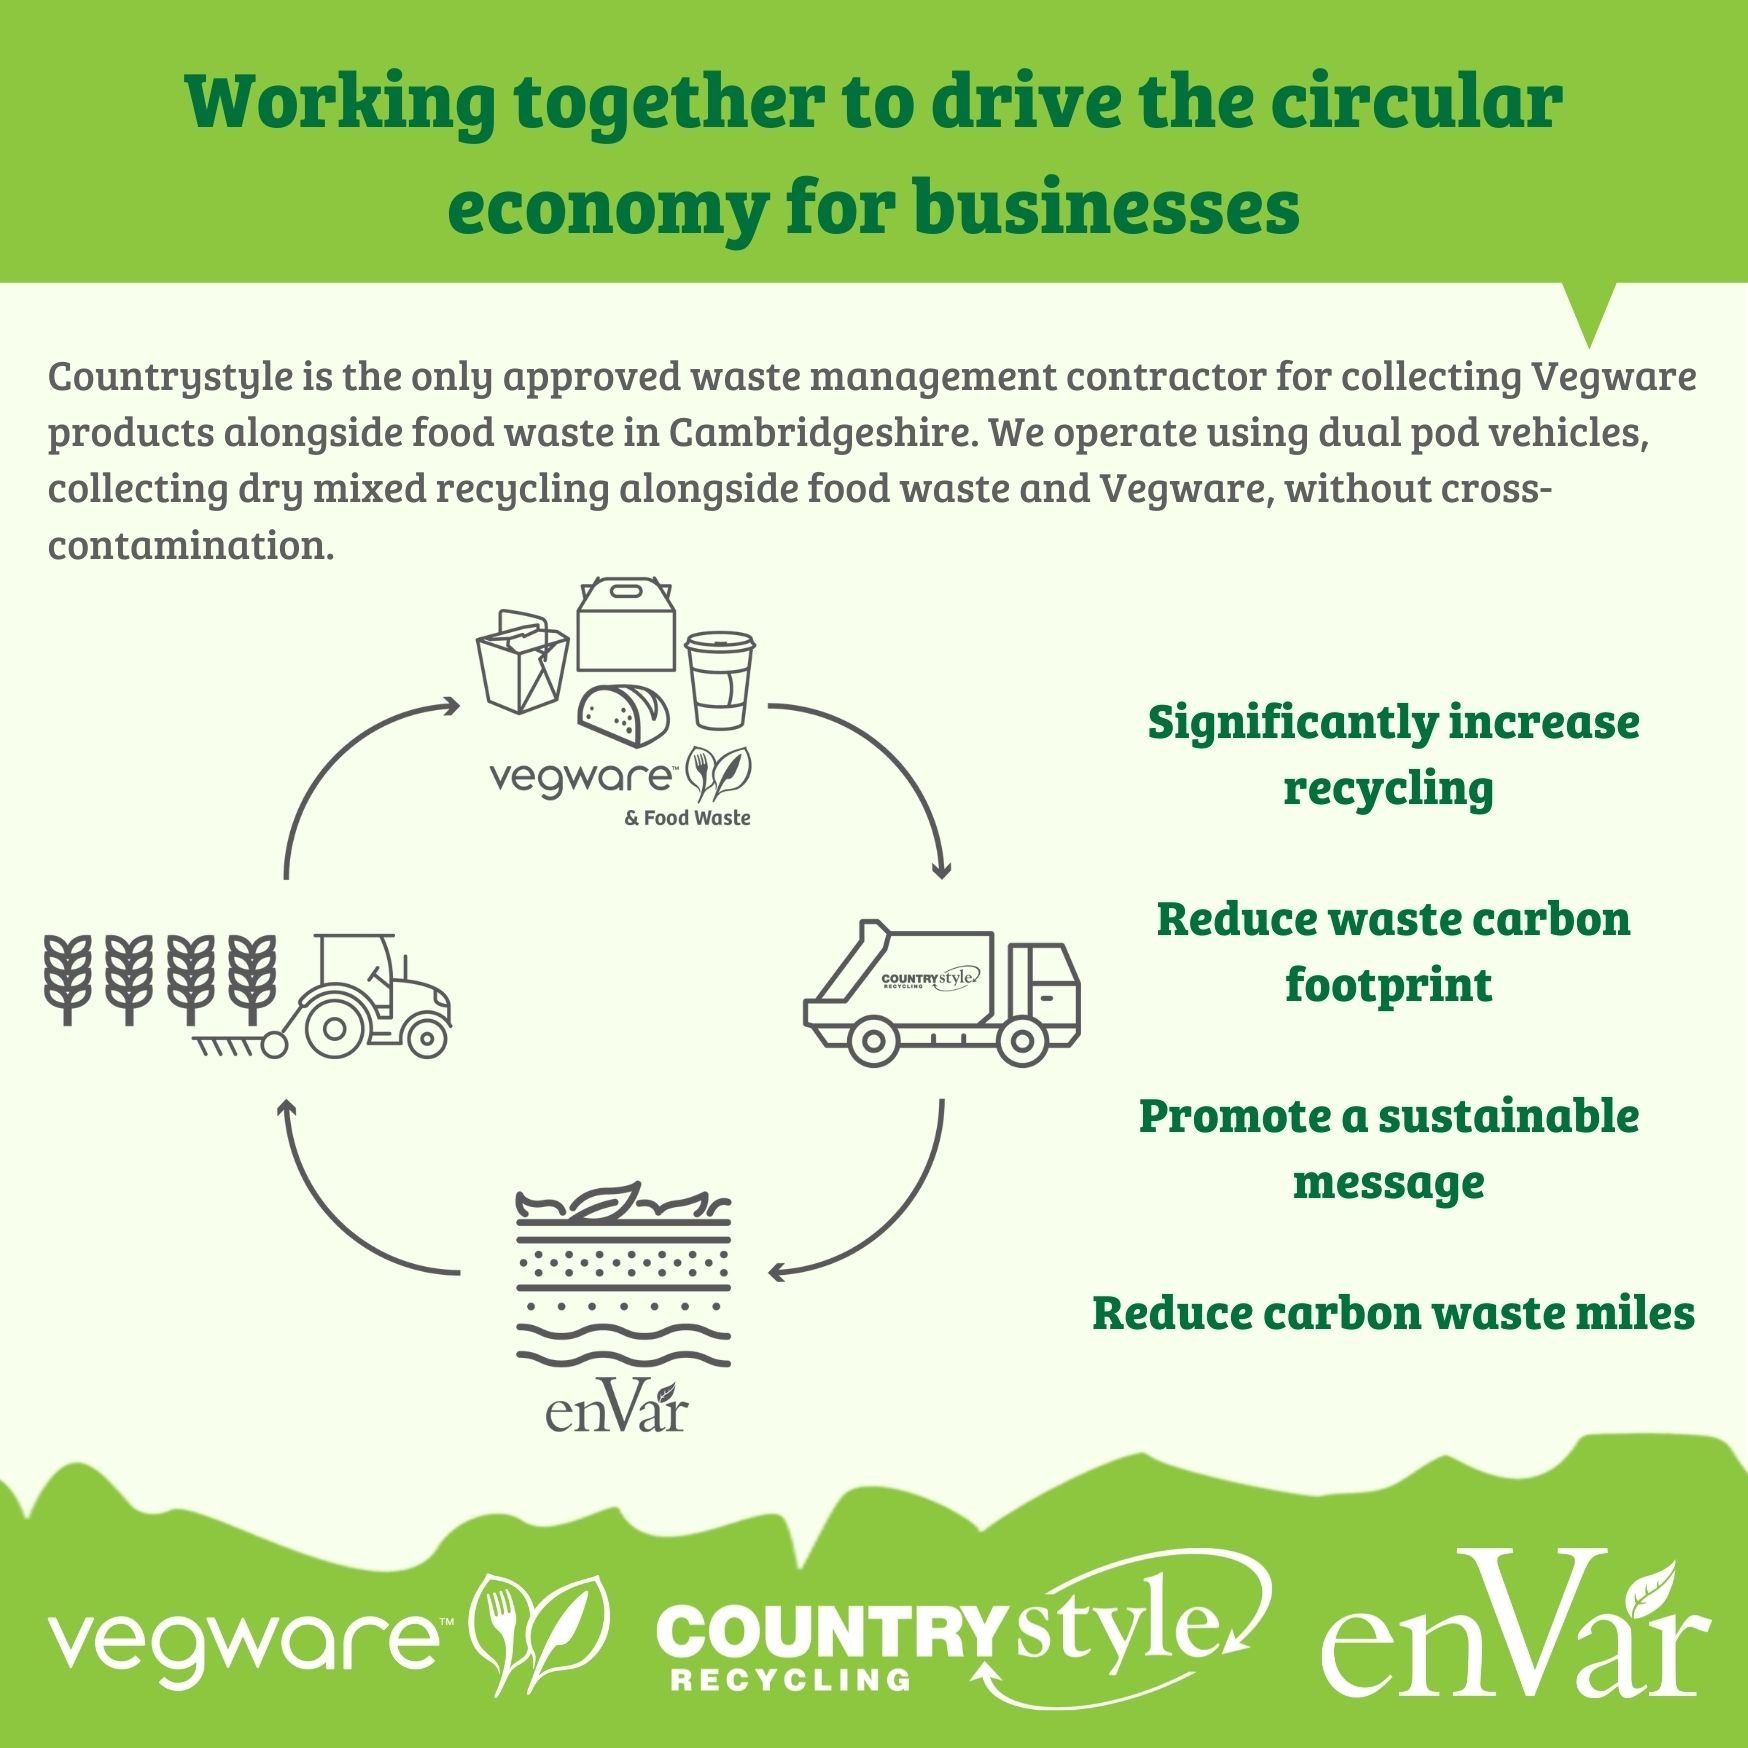 countrystyle-recycling-circular-economy-in-cambridge-2